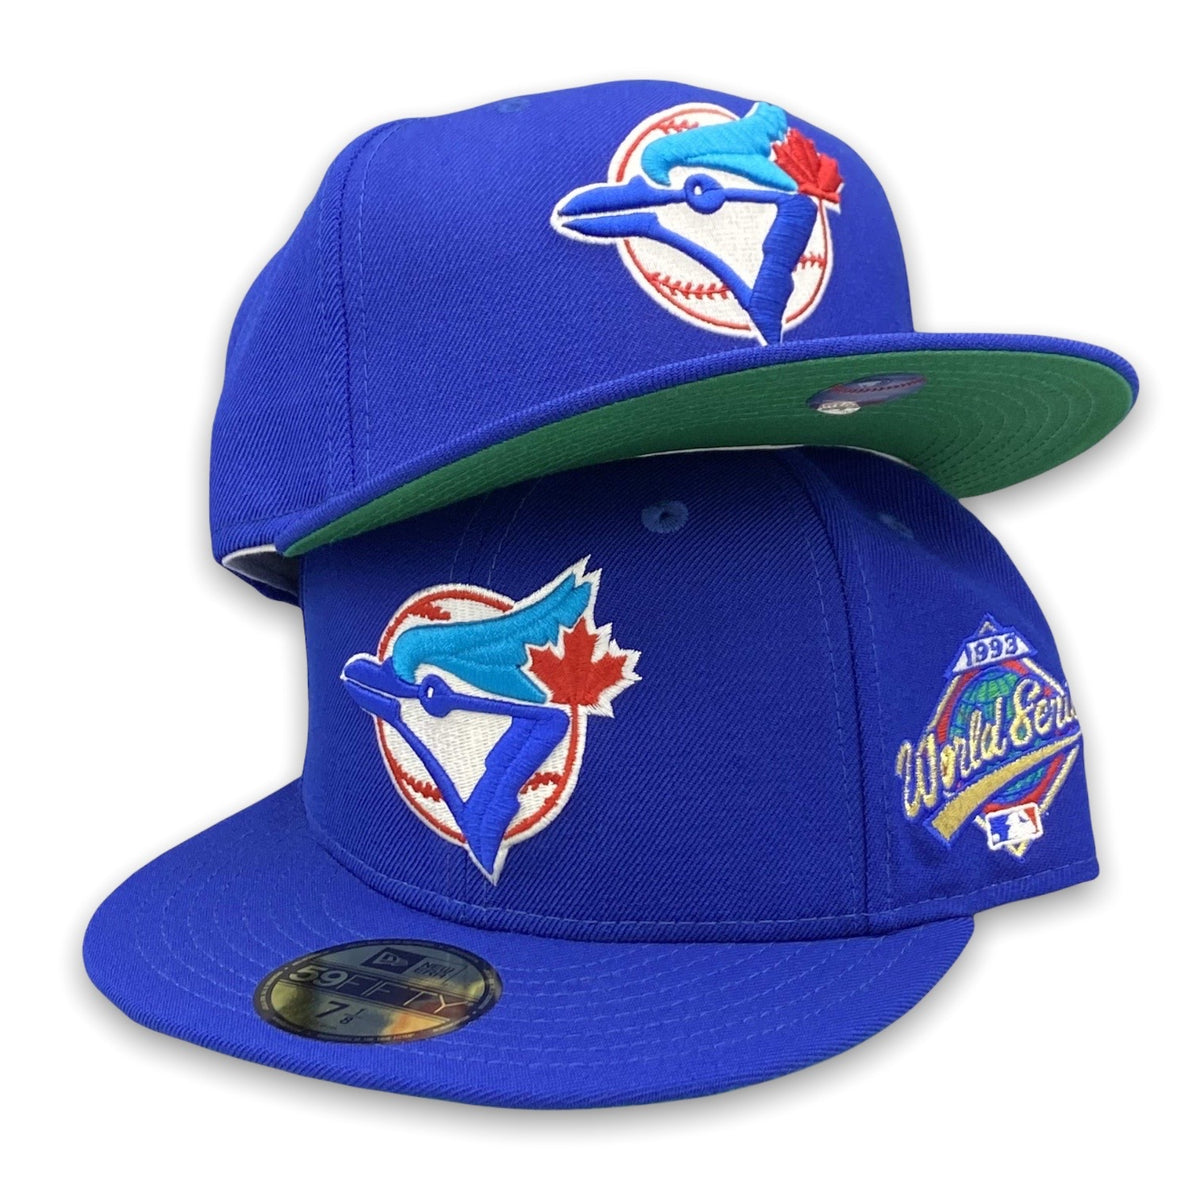 New Era Toronto Blue Jays 9FIFTY World Series Fitted Hat - White